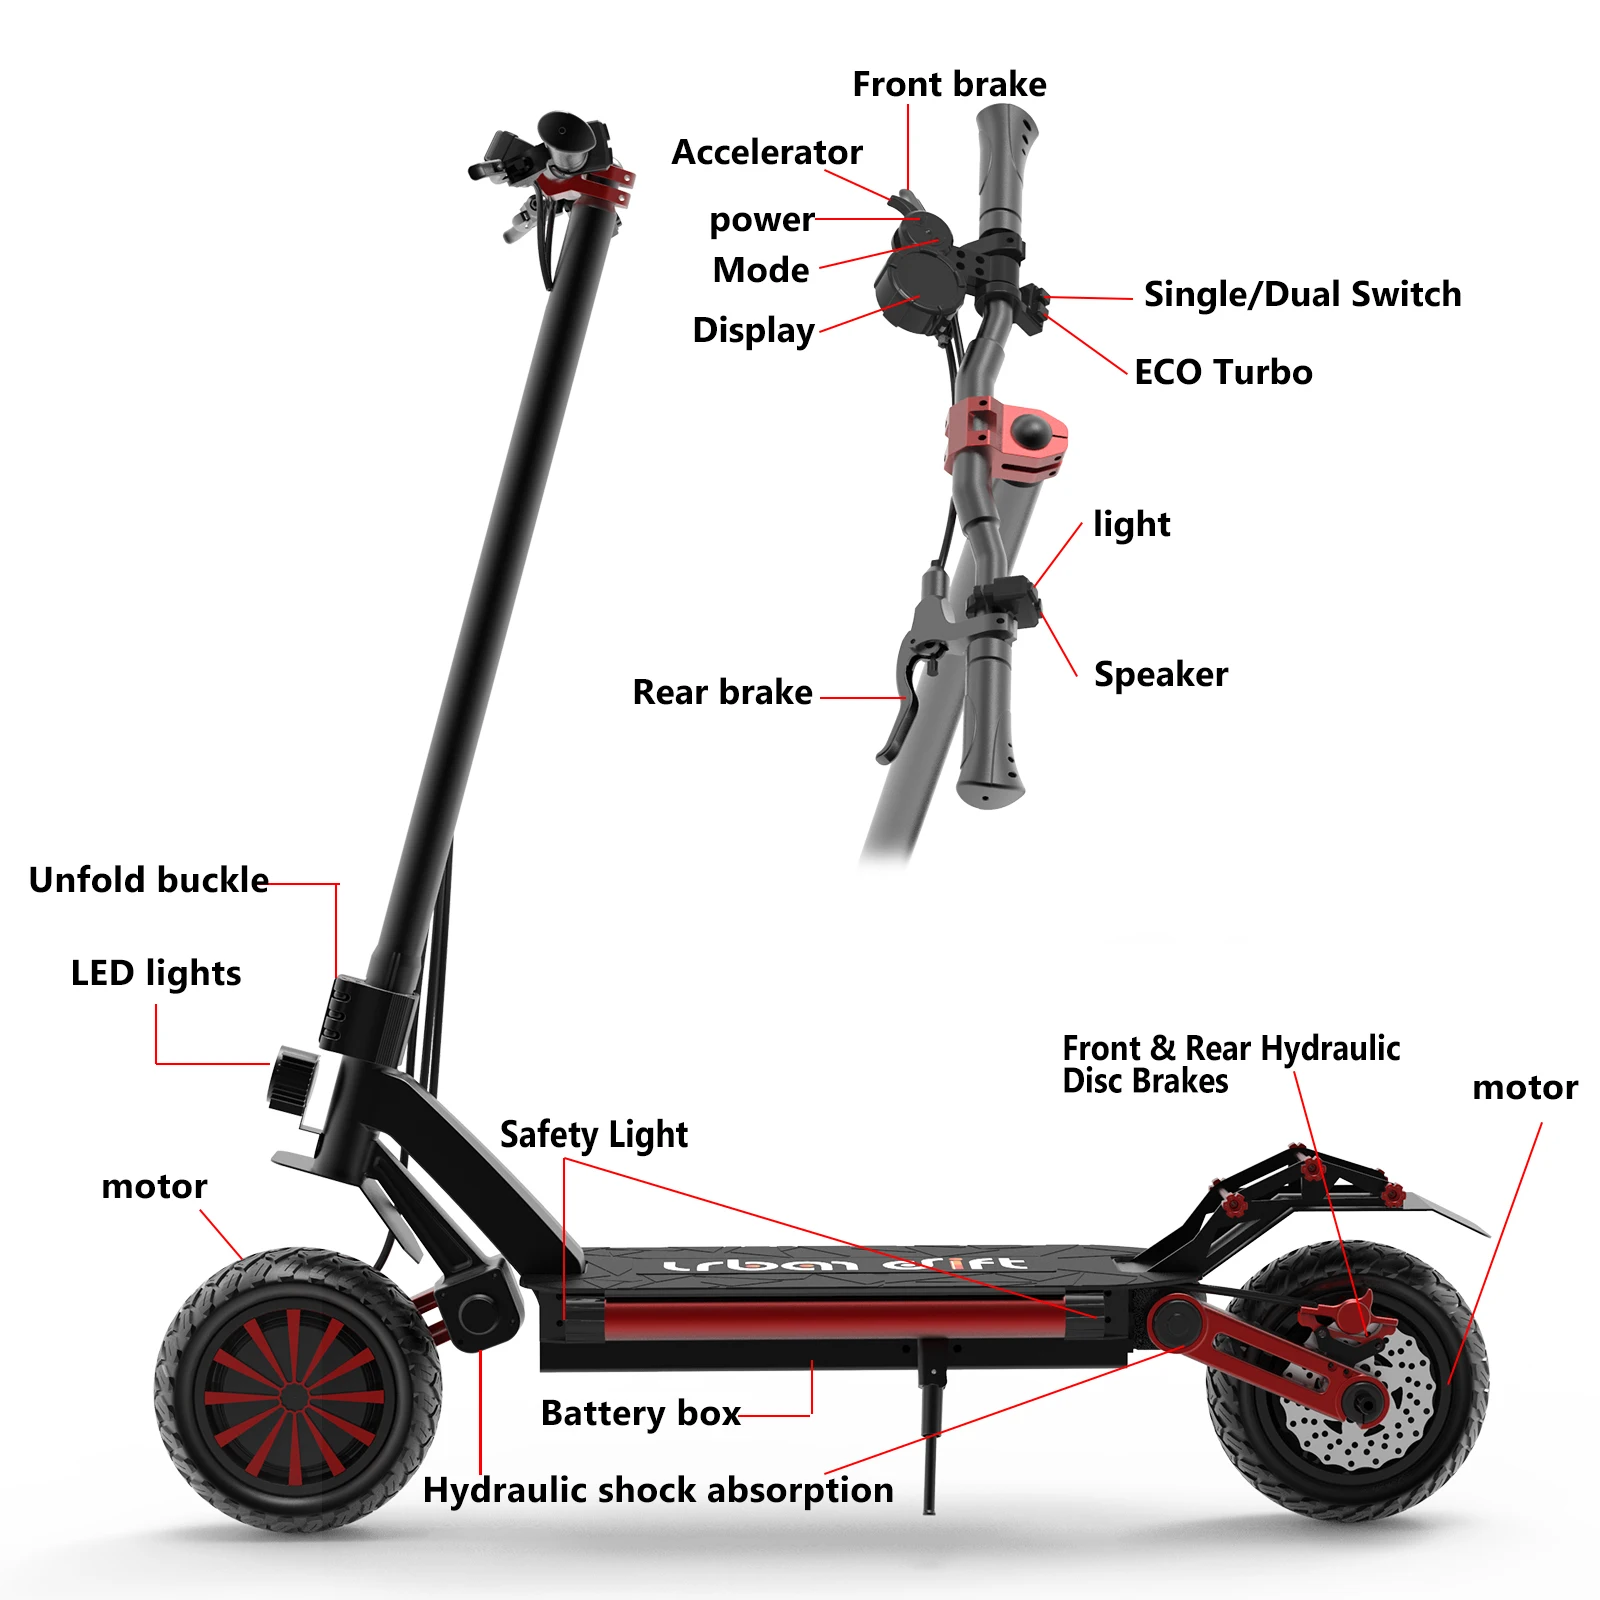 

2021 Hot Sale Factory Cheap Price Electric Scooters EU/US/UK/Germany Warehouse Newest Design 10 Inch fot Adults Electric Scooter